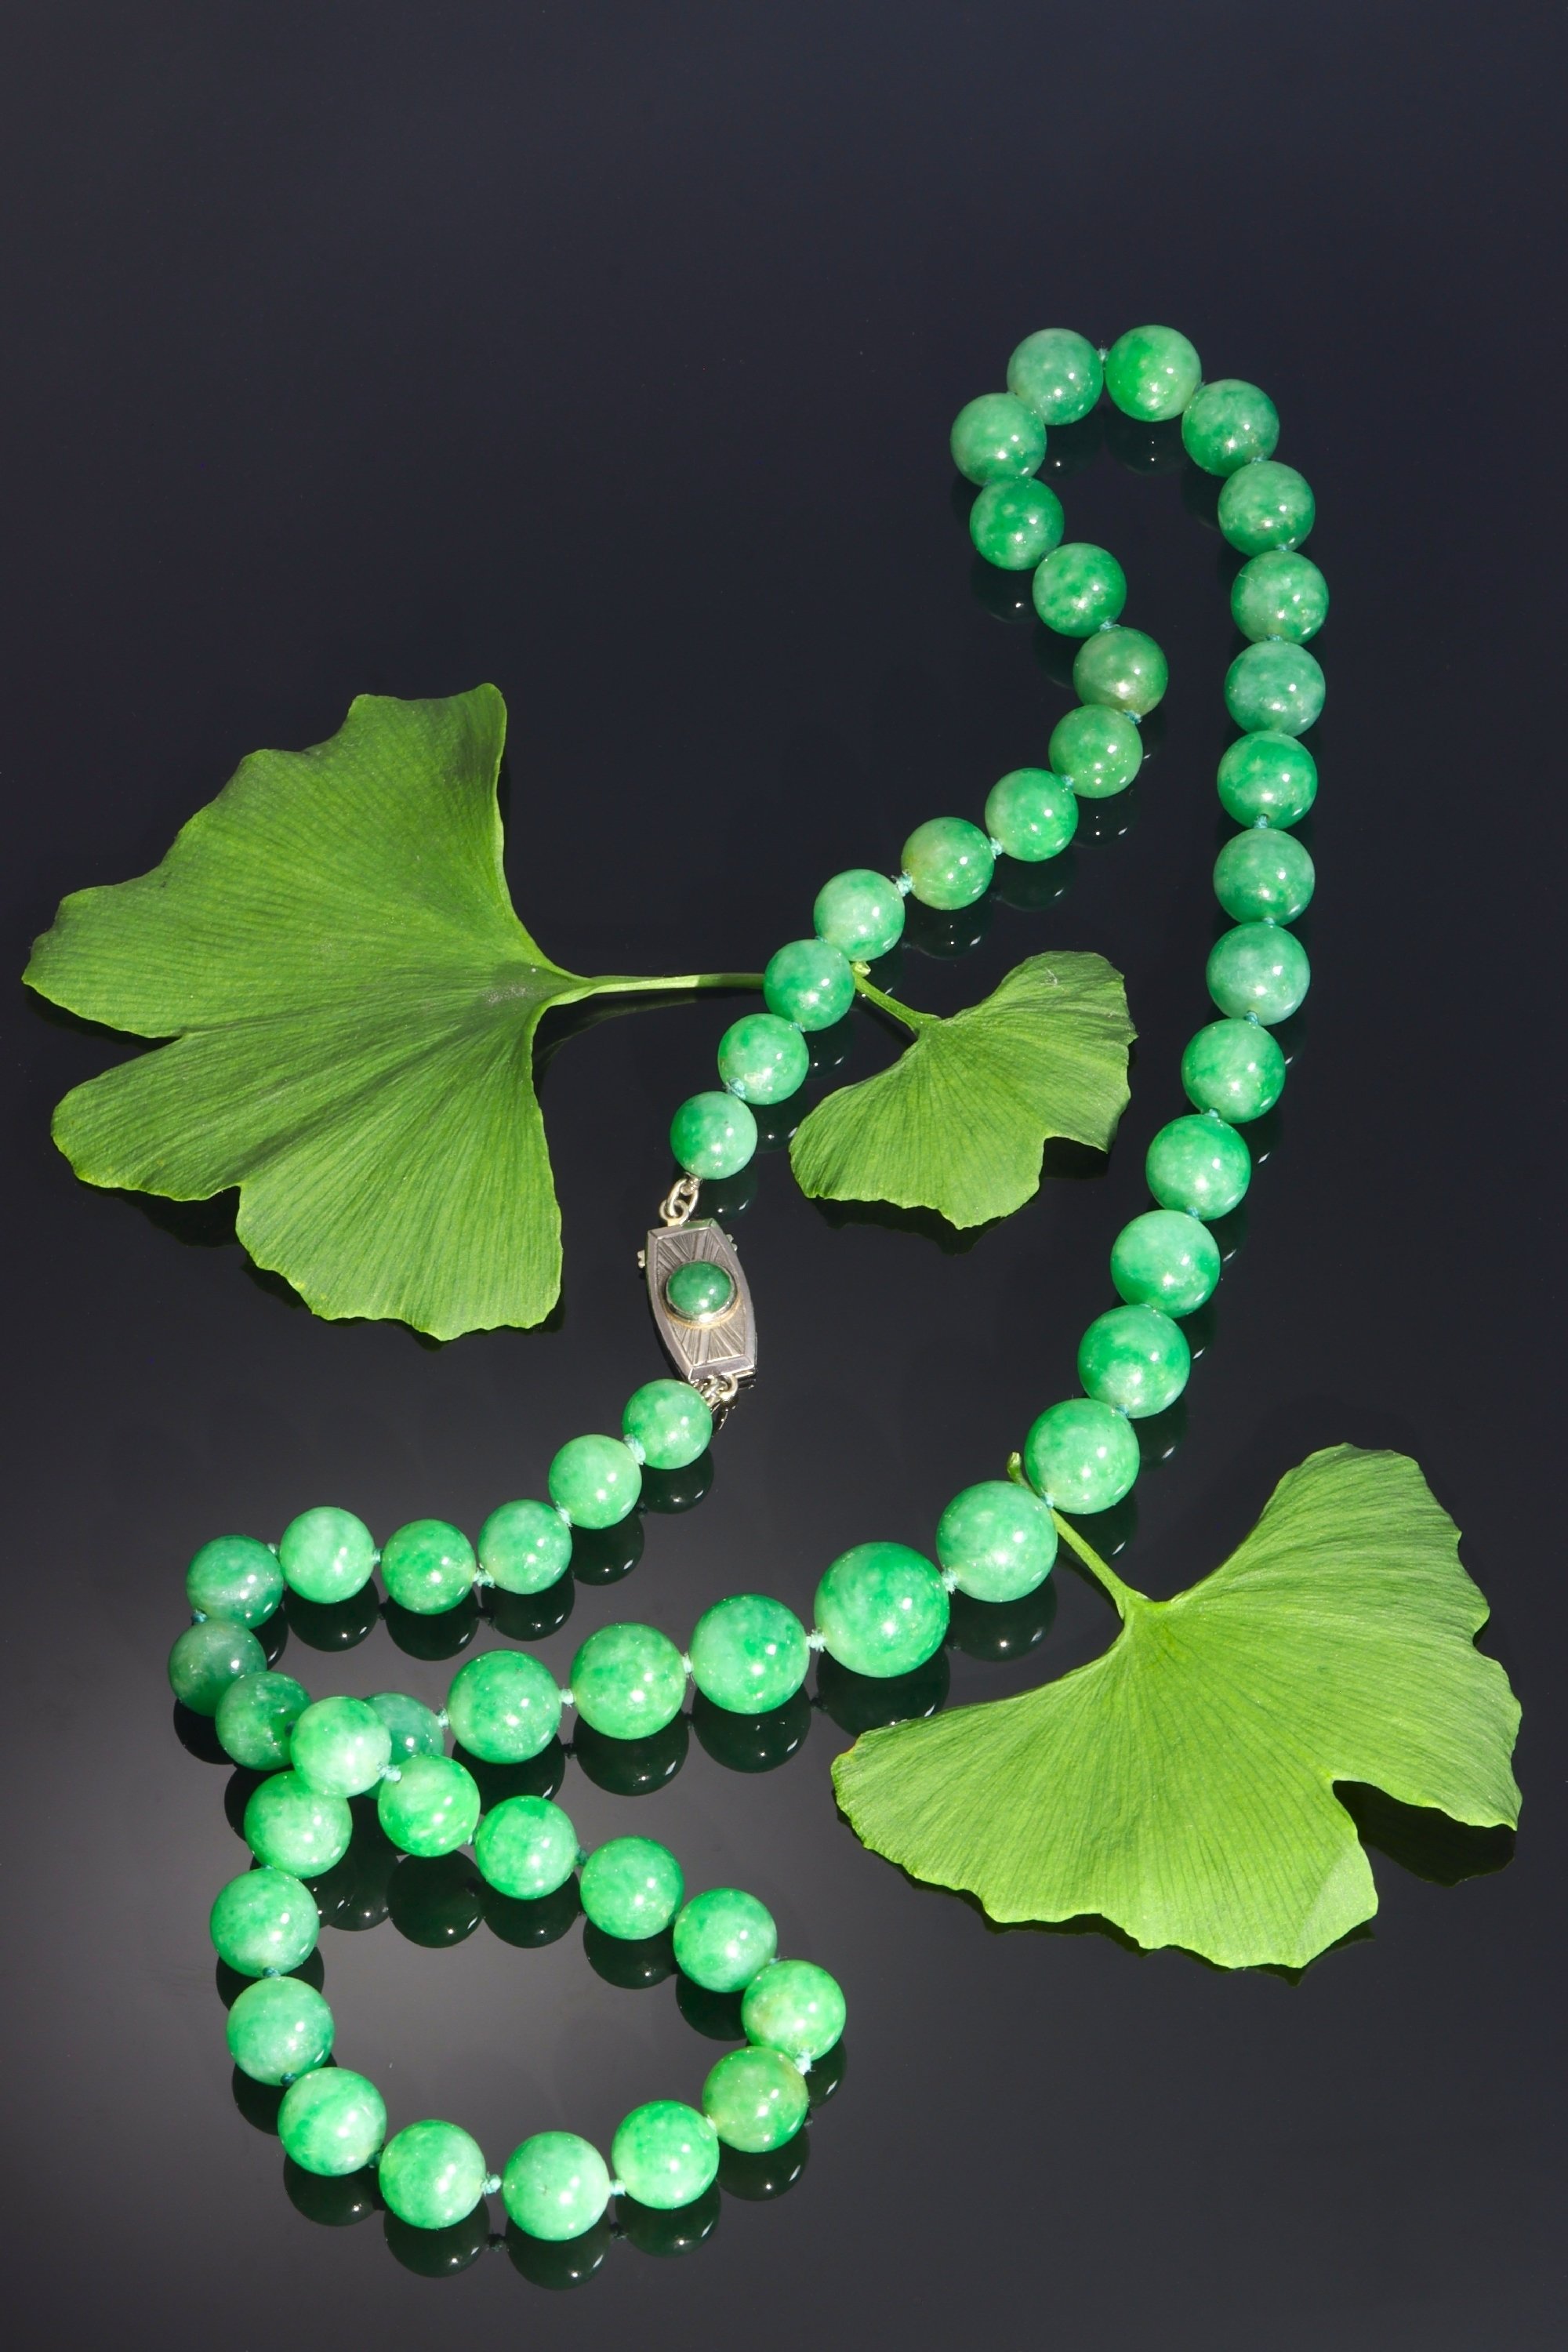 Click the picture to see of this Certified top quality natural jadeite necklace of 53 beads (67,51 grams) - A-Jade, translucent, mottled light green and green